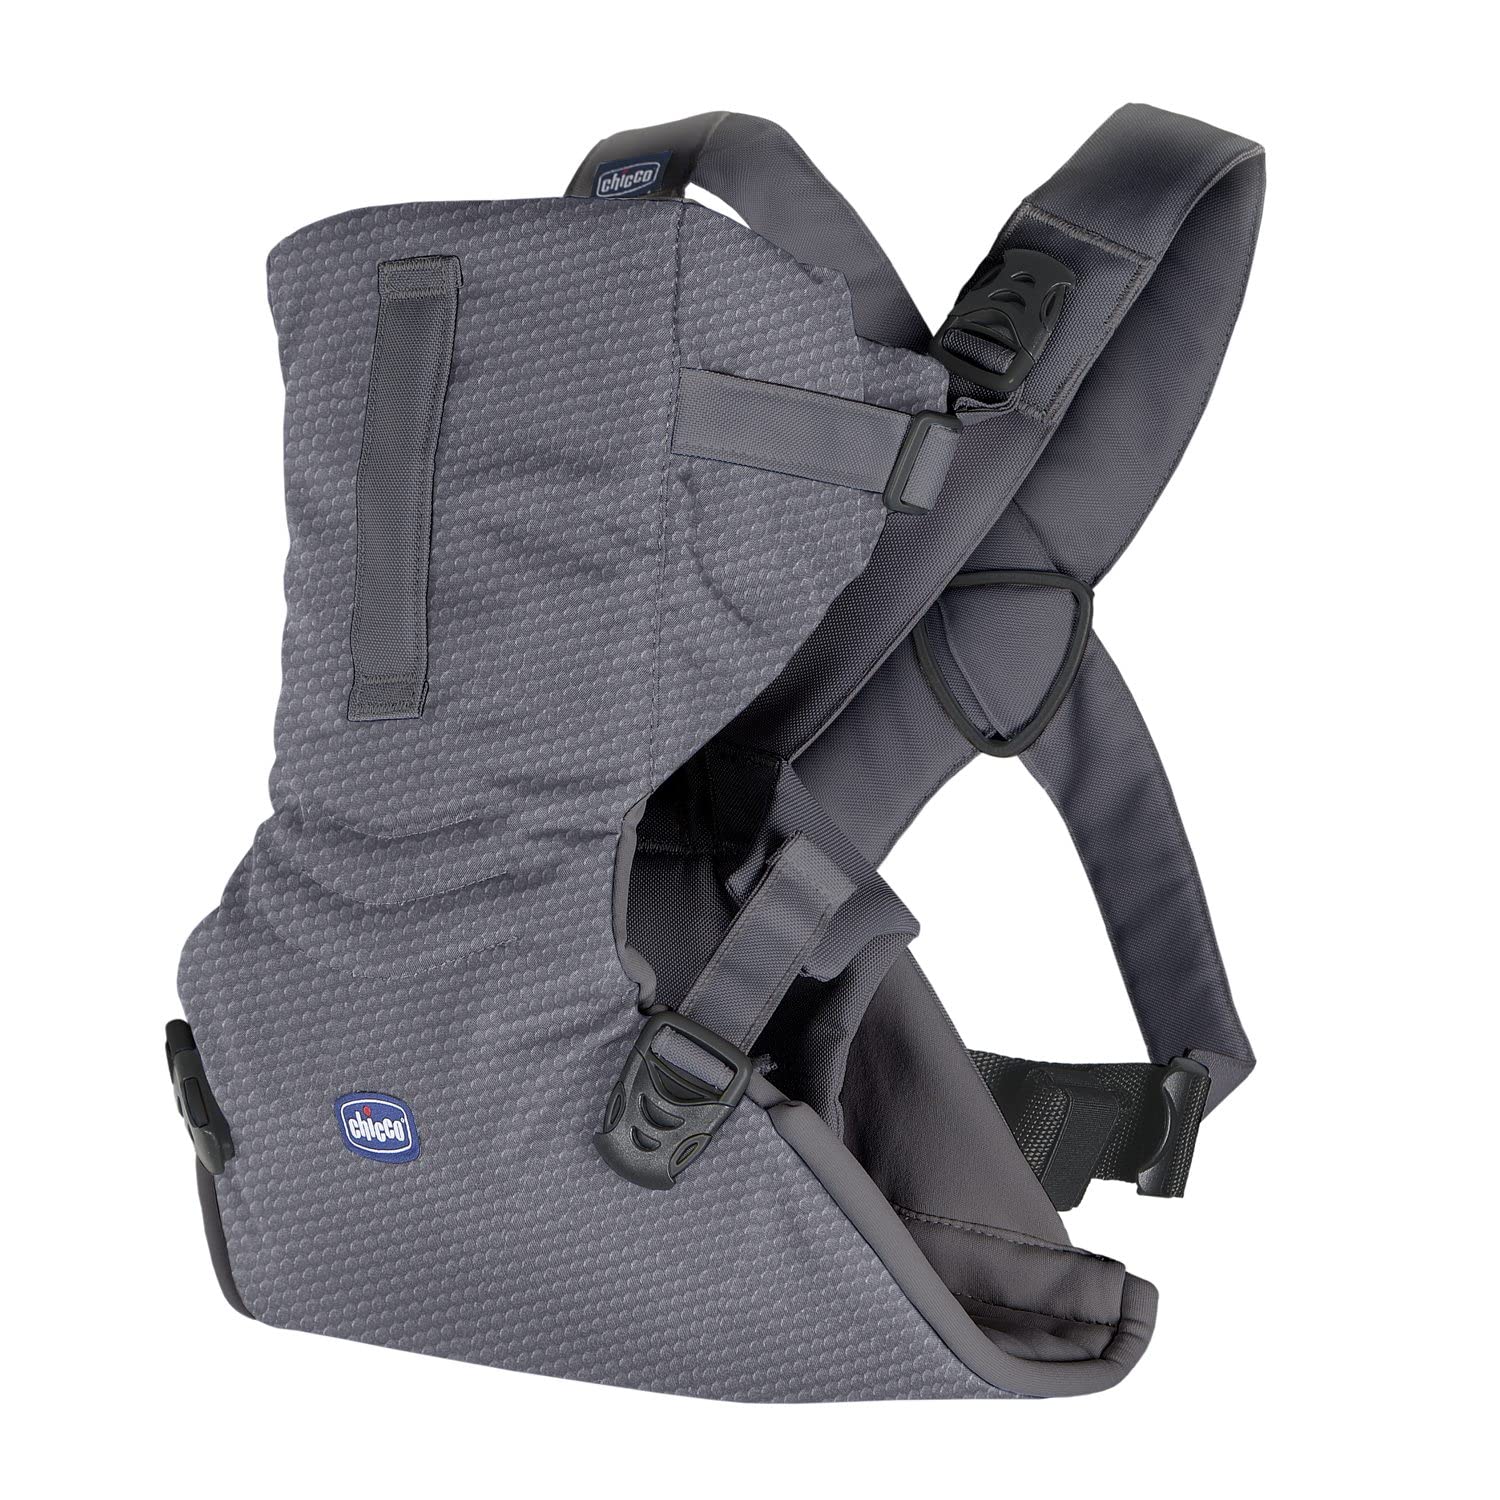 Chicco EasyFit Ergonomic Multi Position Carrier Bag Wide Seat Suitable for All Body Sizes - Ideal from Birth - Moon Grey